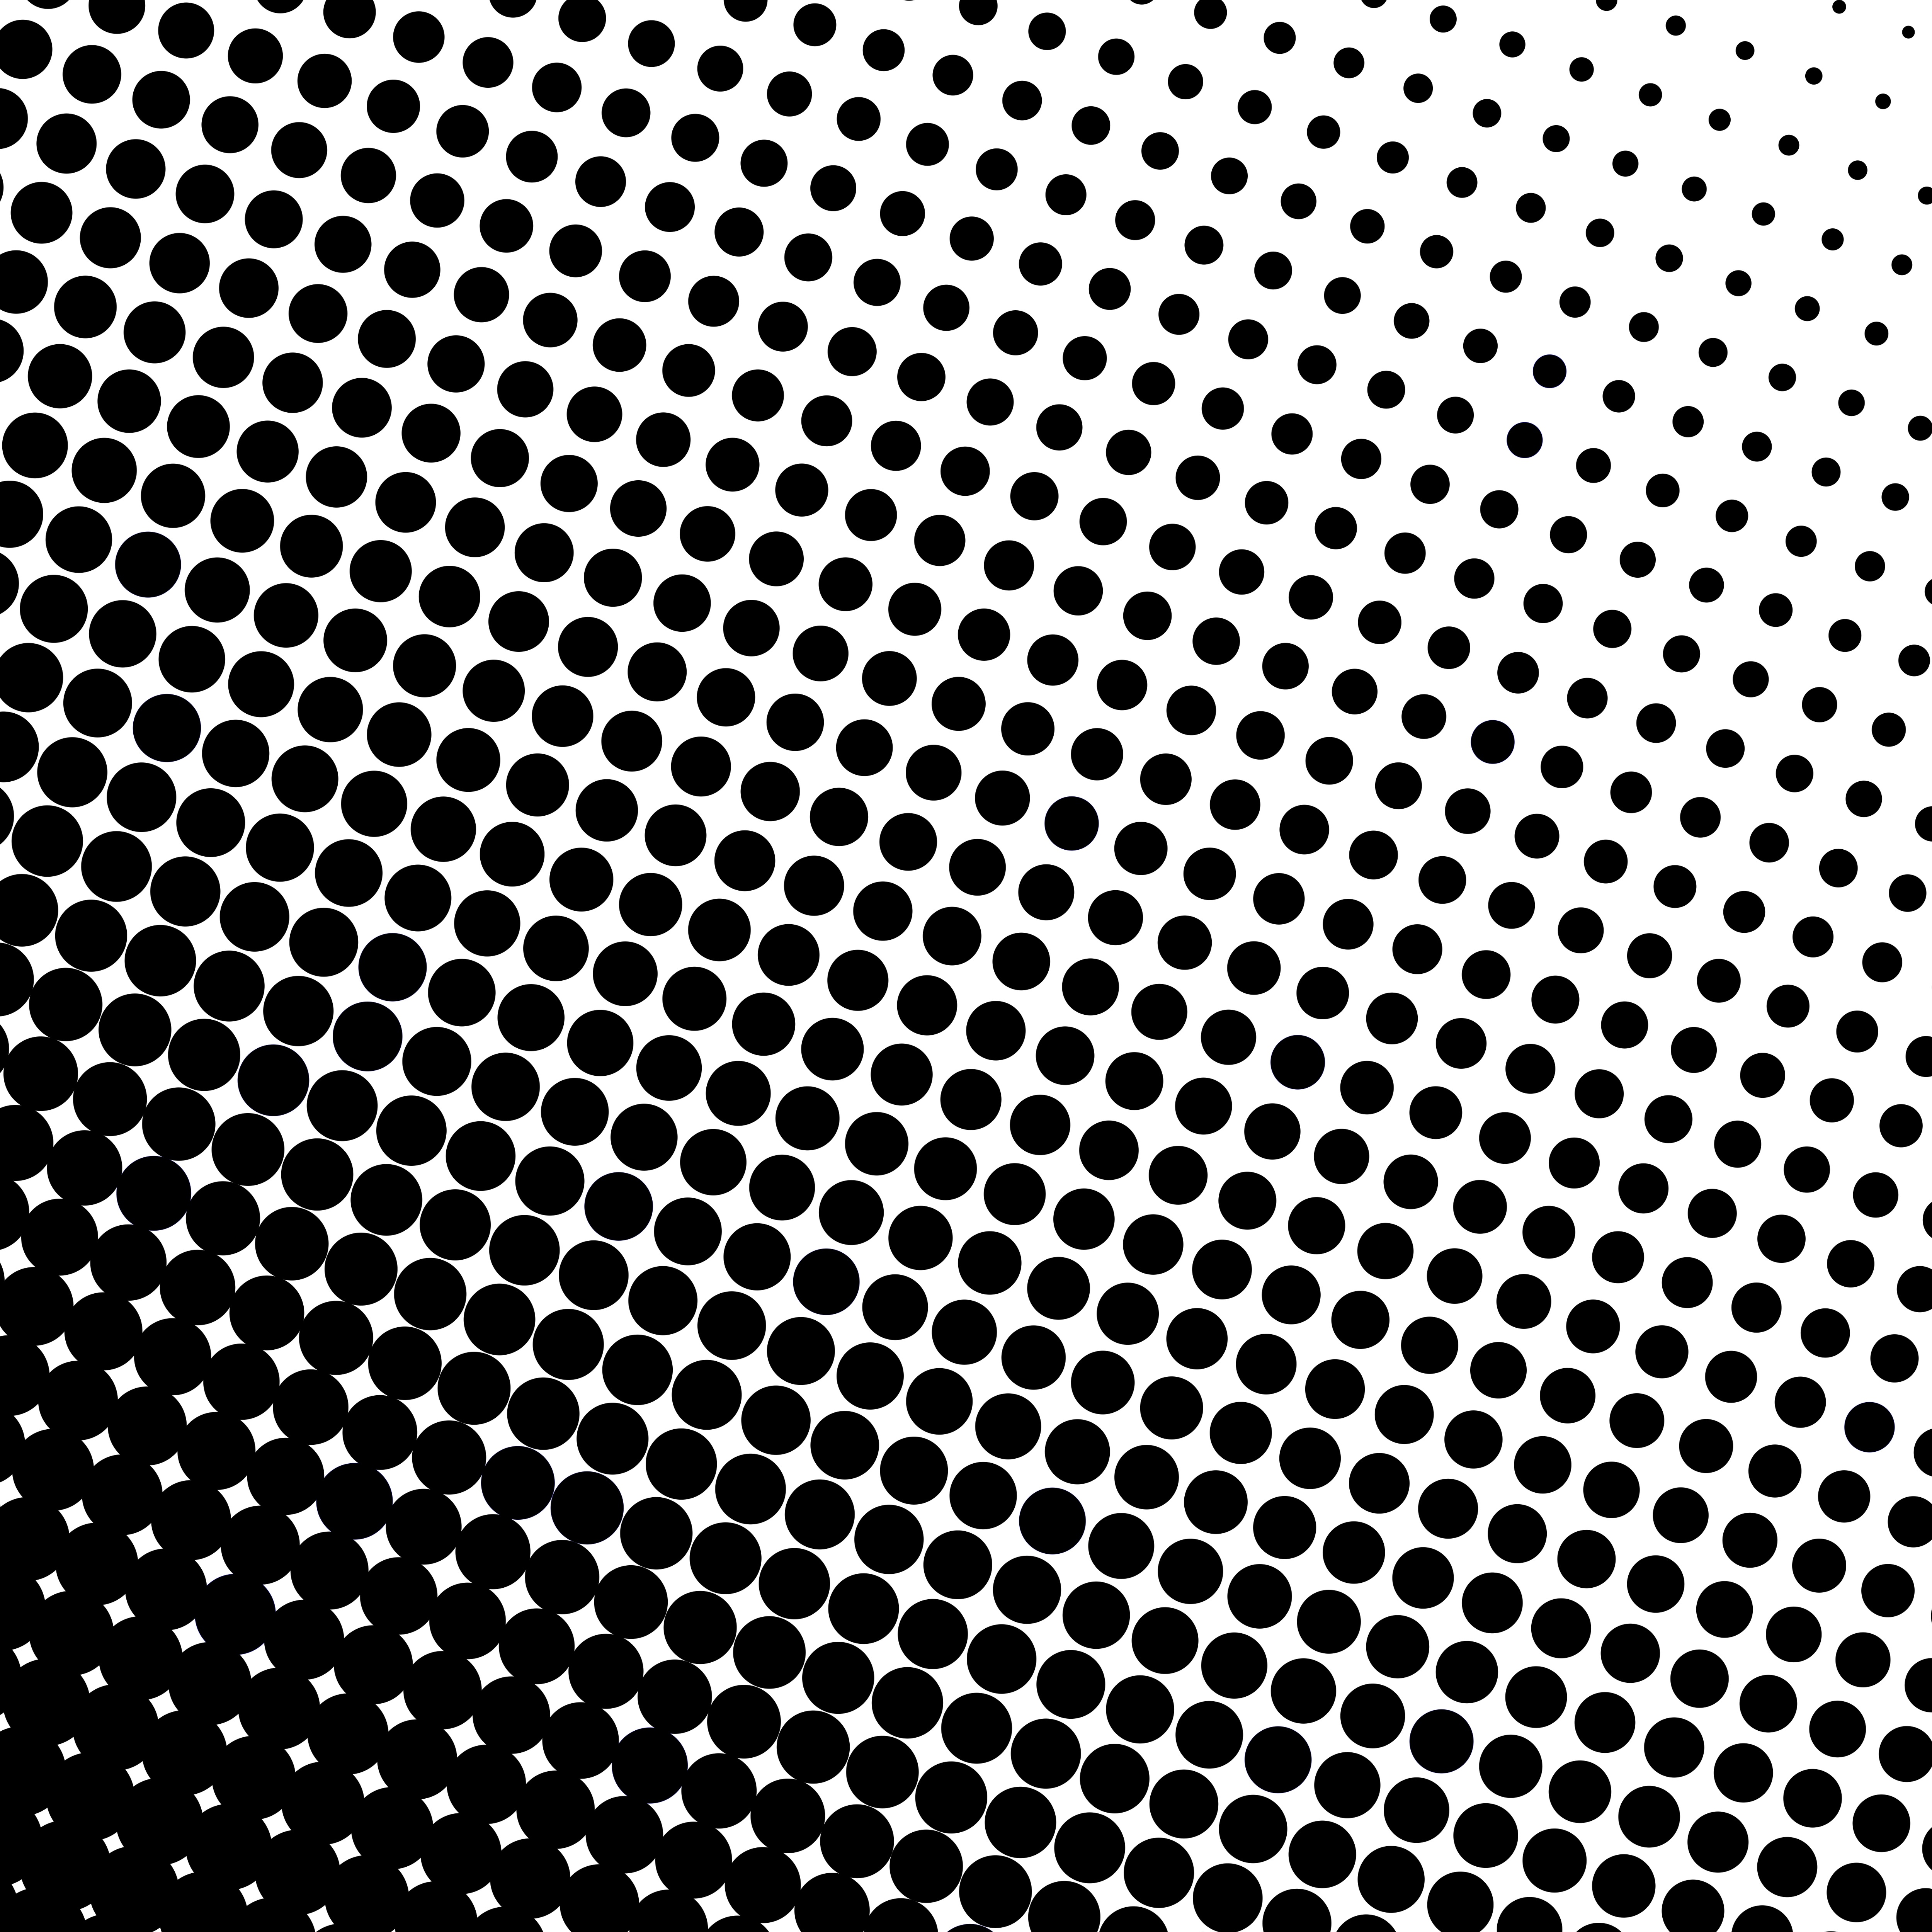 circles, texture, textures, bw, chb, lots of, multitude, magnification, increase